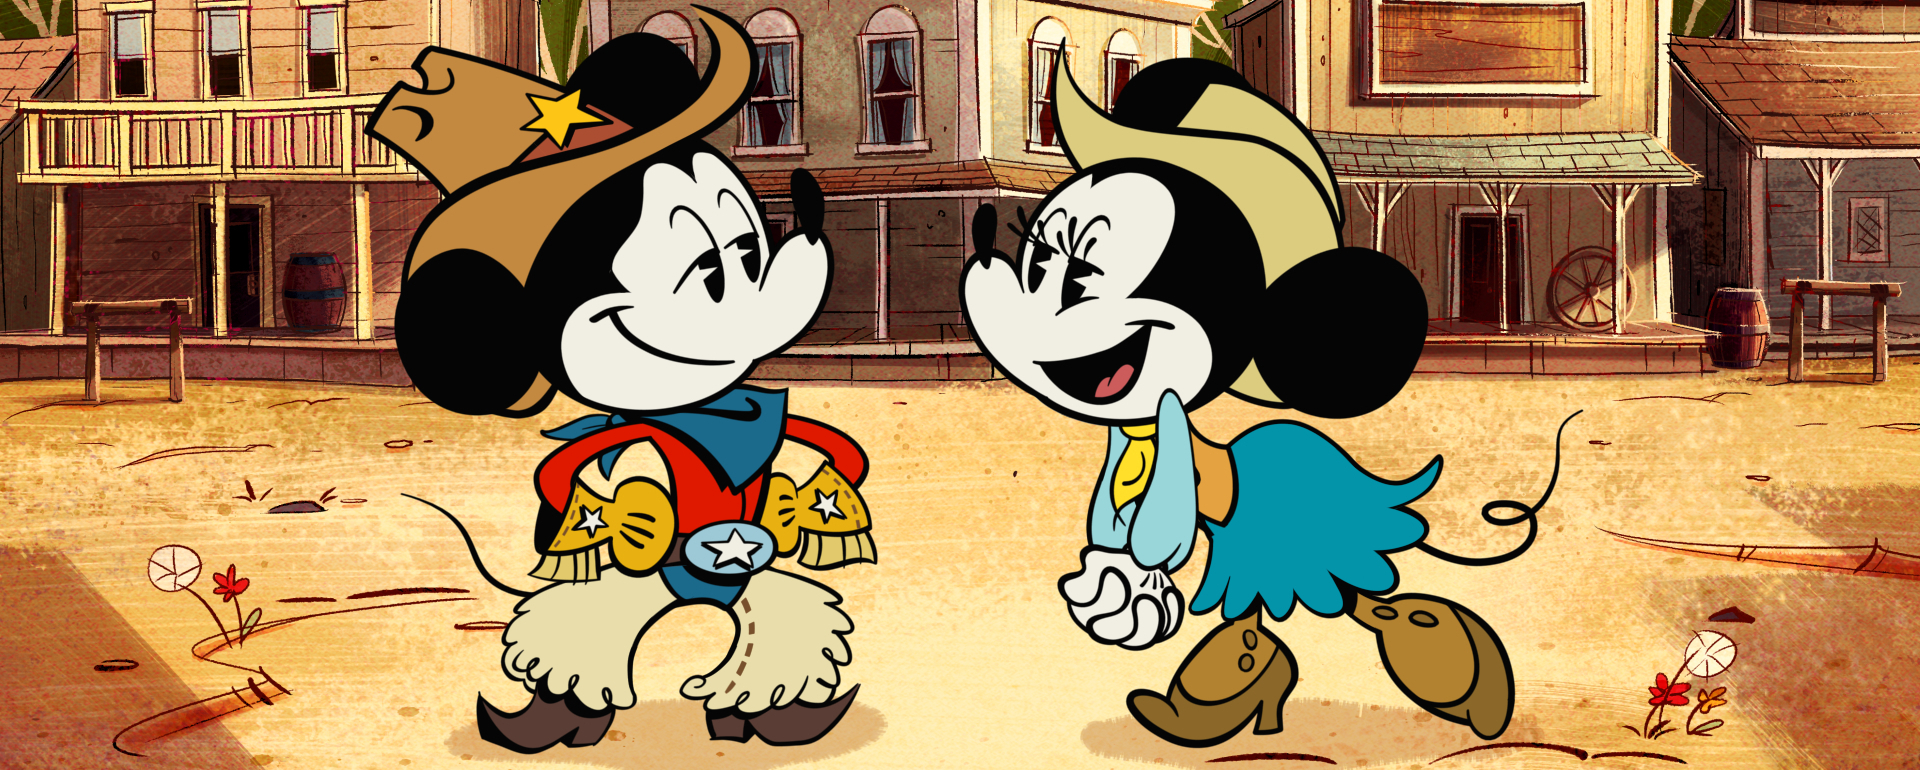 “The Wonderful World Of Mickey Mouse” Animated Shorts Premiere On Mickey’s Birthday, November 18